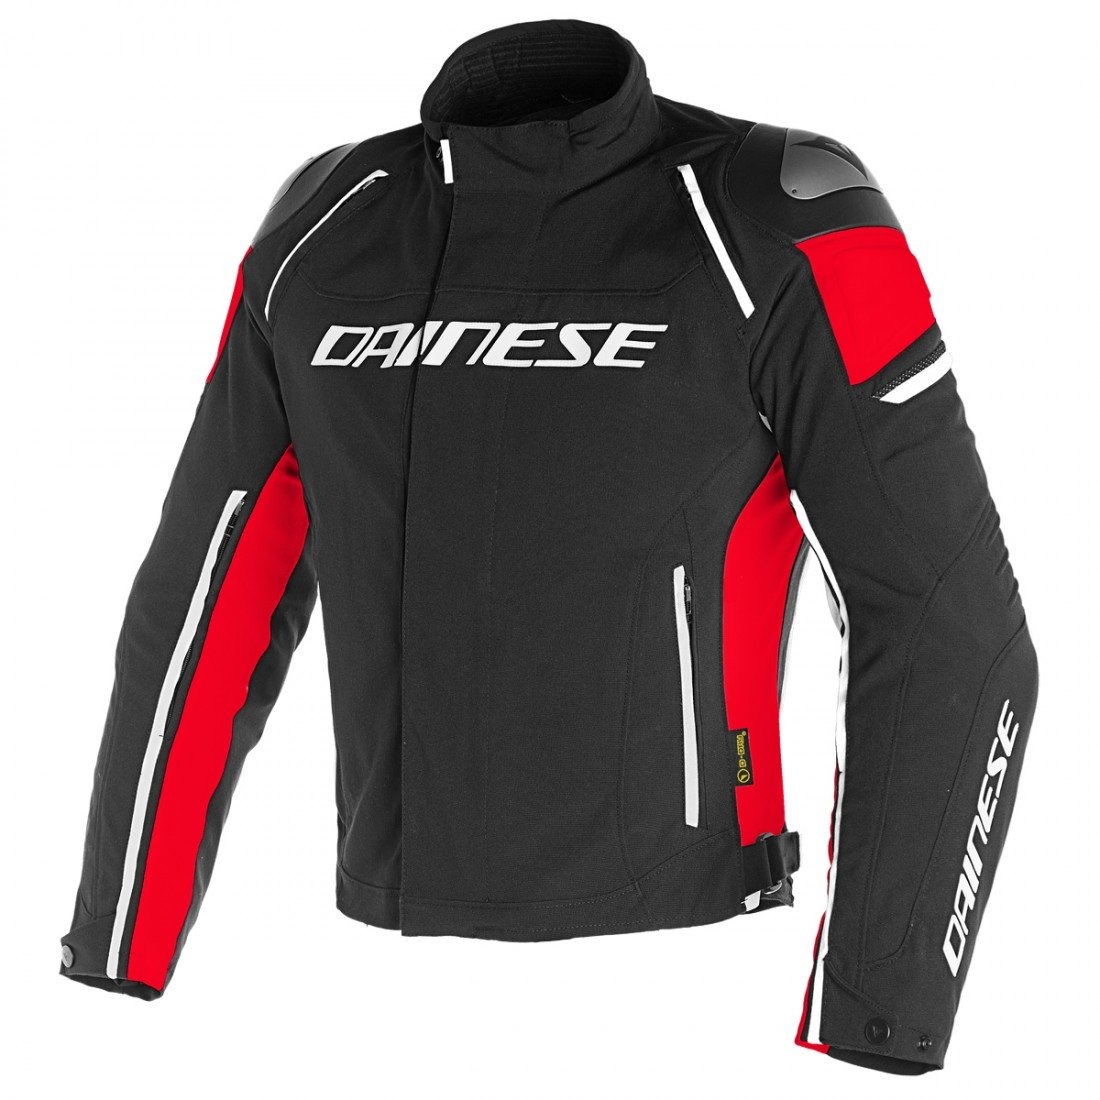 Image of Dainese Racing 3 D-Dry Jacket Black Red Size 46 ID 8052644796148